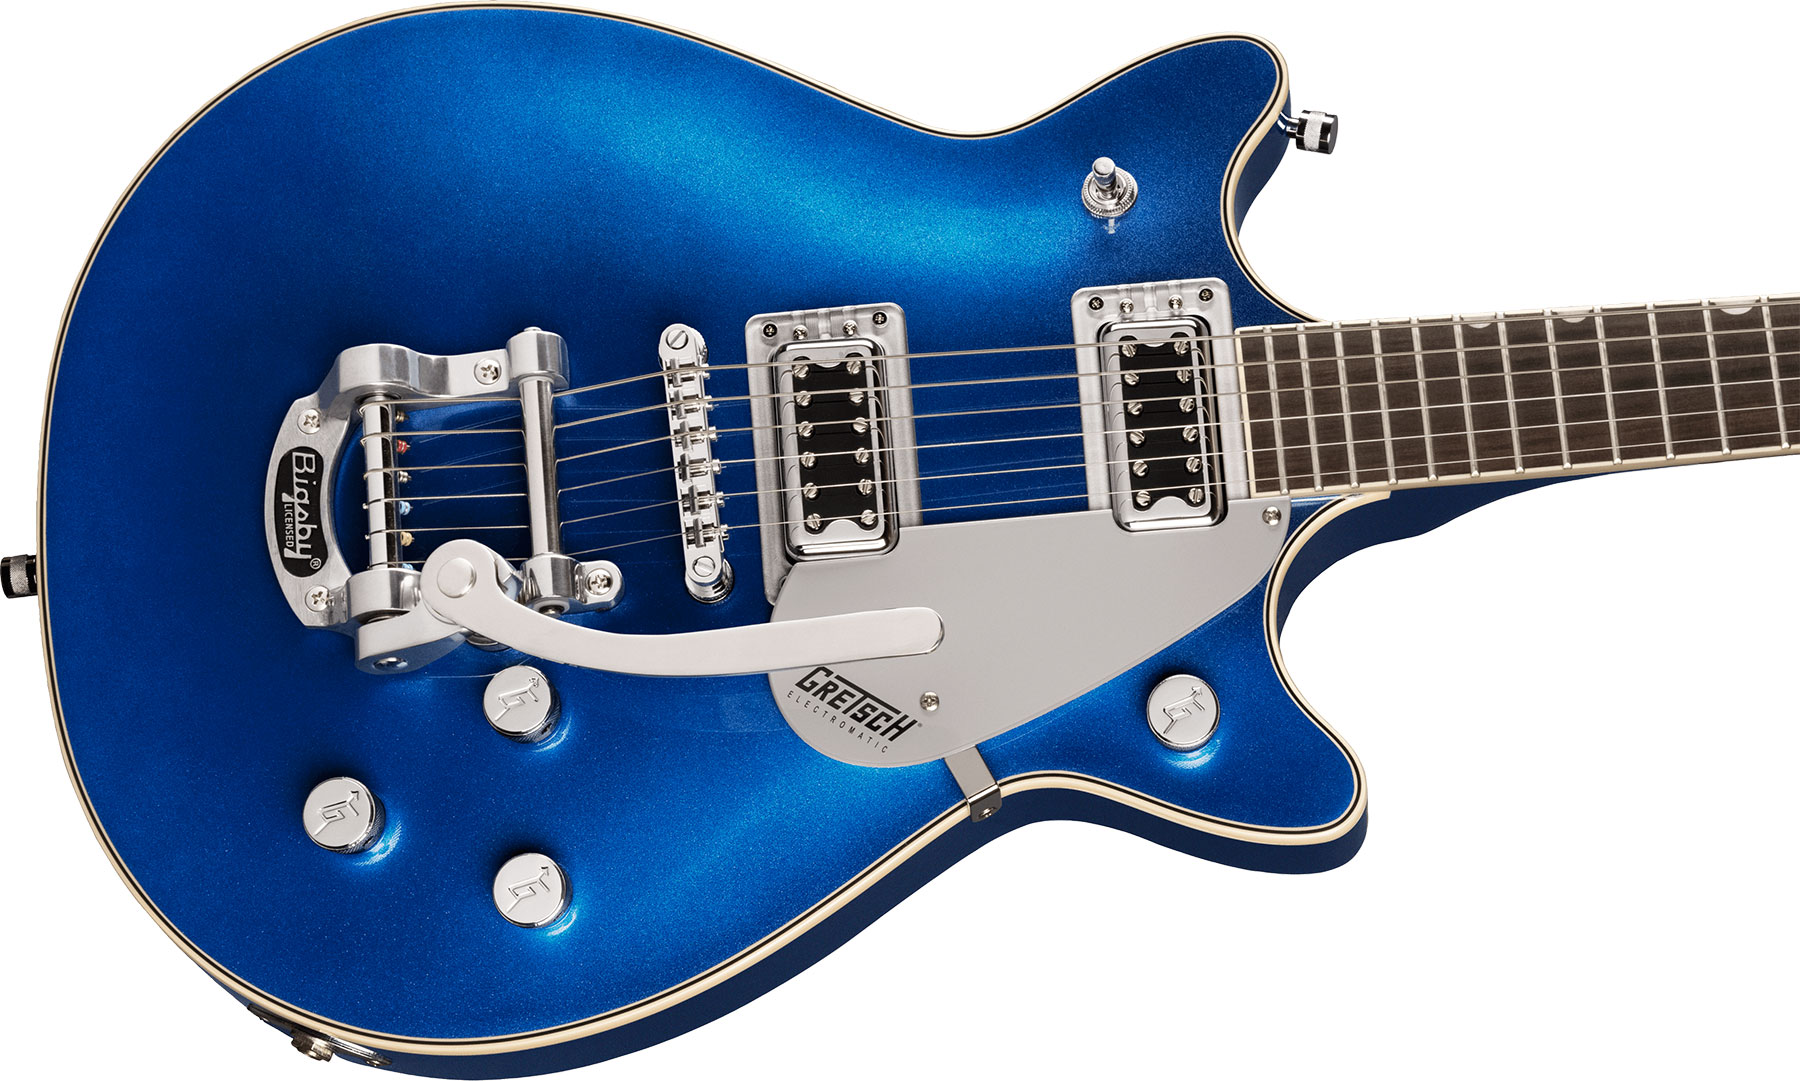 Gretsch G5232t Electromatic Double Jet Ft 2h Bigsby Lau - Fairlane Blue - Double cut electric guitar - Variation 2